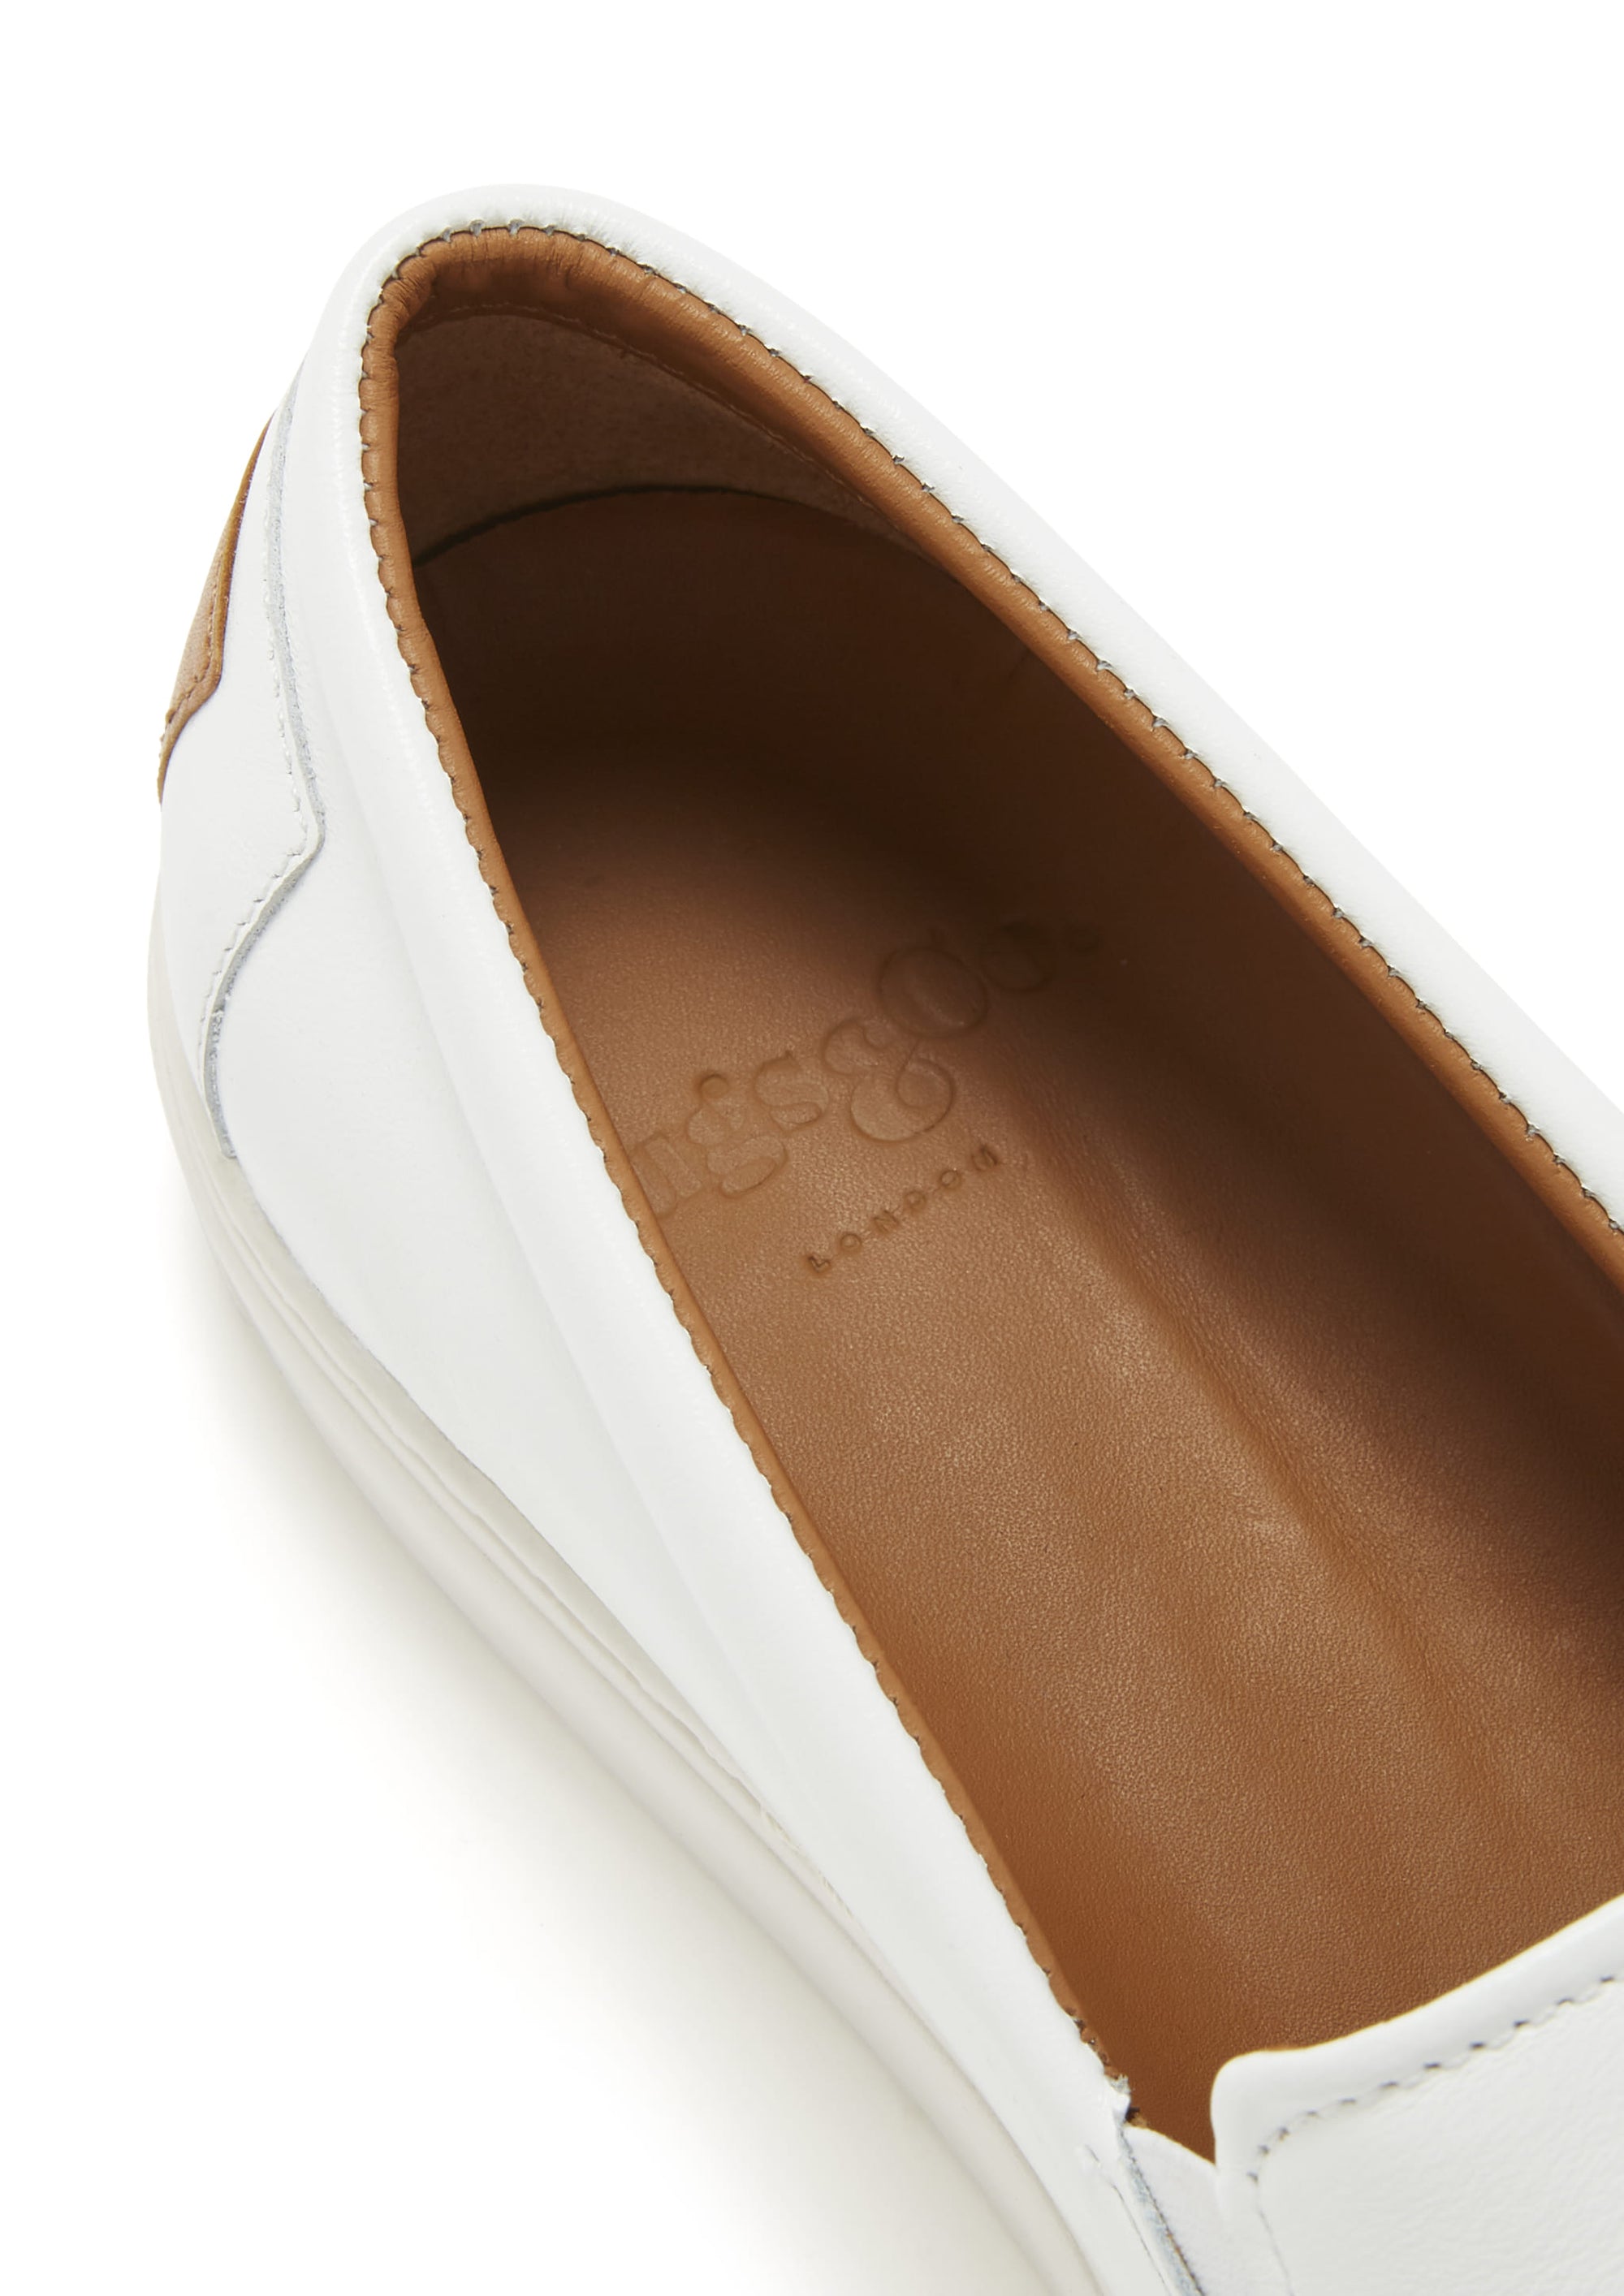 Slip-on Sneakers, white leather